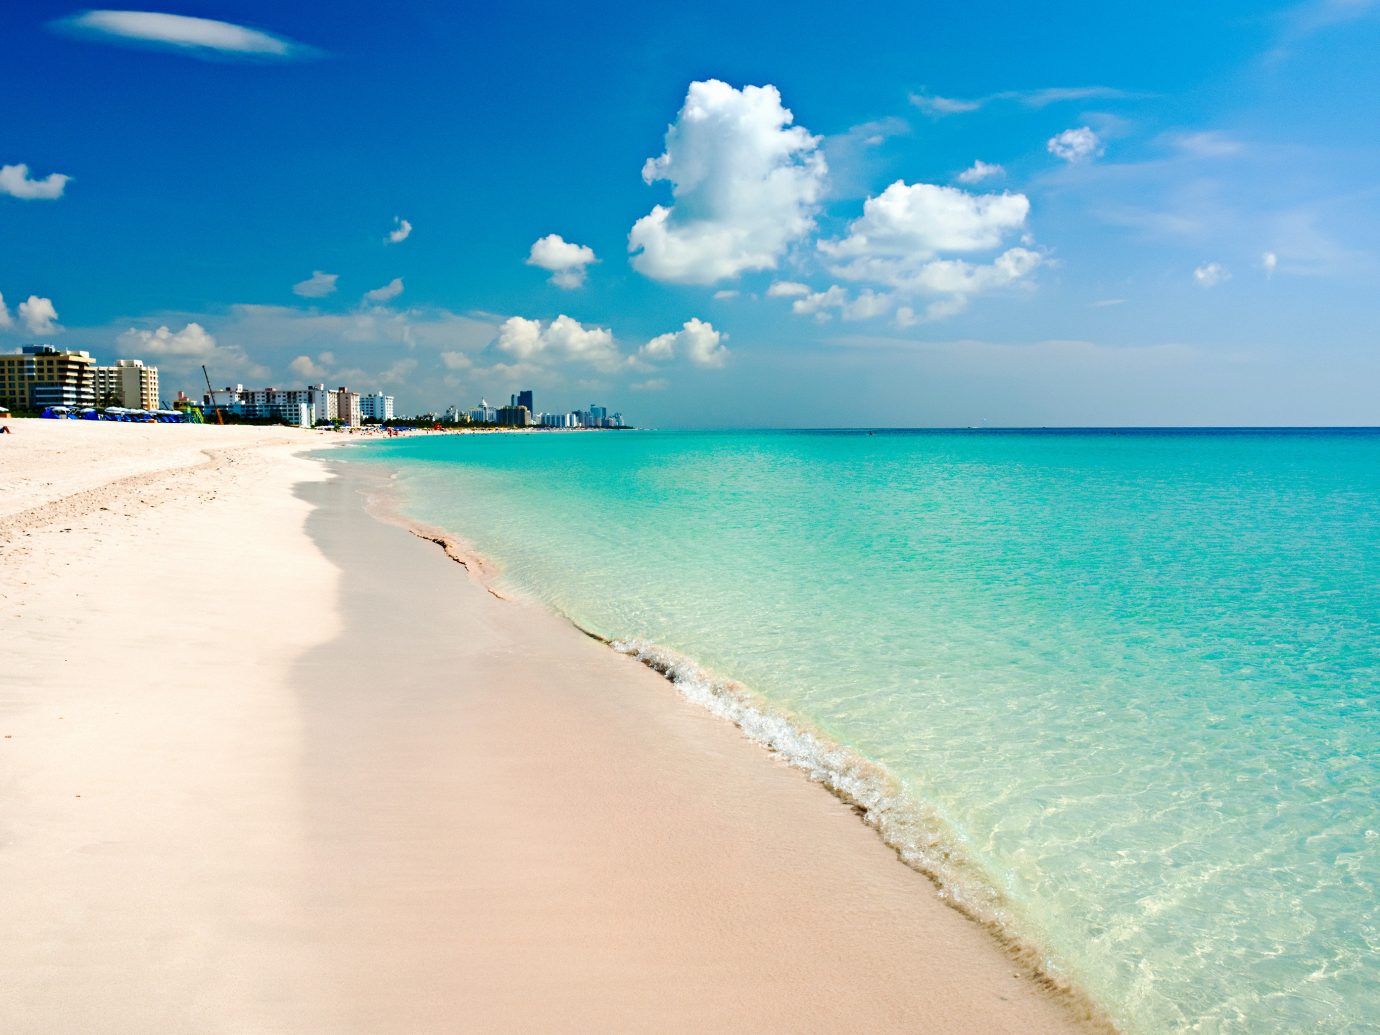 Beach Beachfront Hotels Ocean Outdoors Waterfront sky water outdoor ground Nature Sea shore body of water horizon sand vacation caribbean wave Coast wind wave cloud sunlight sandy bay day